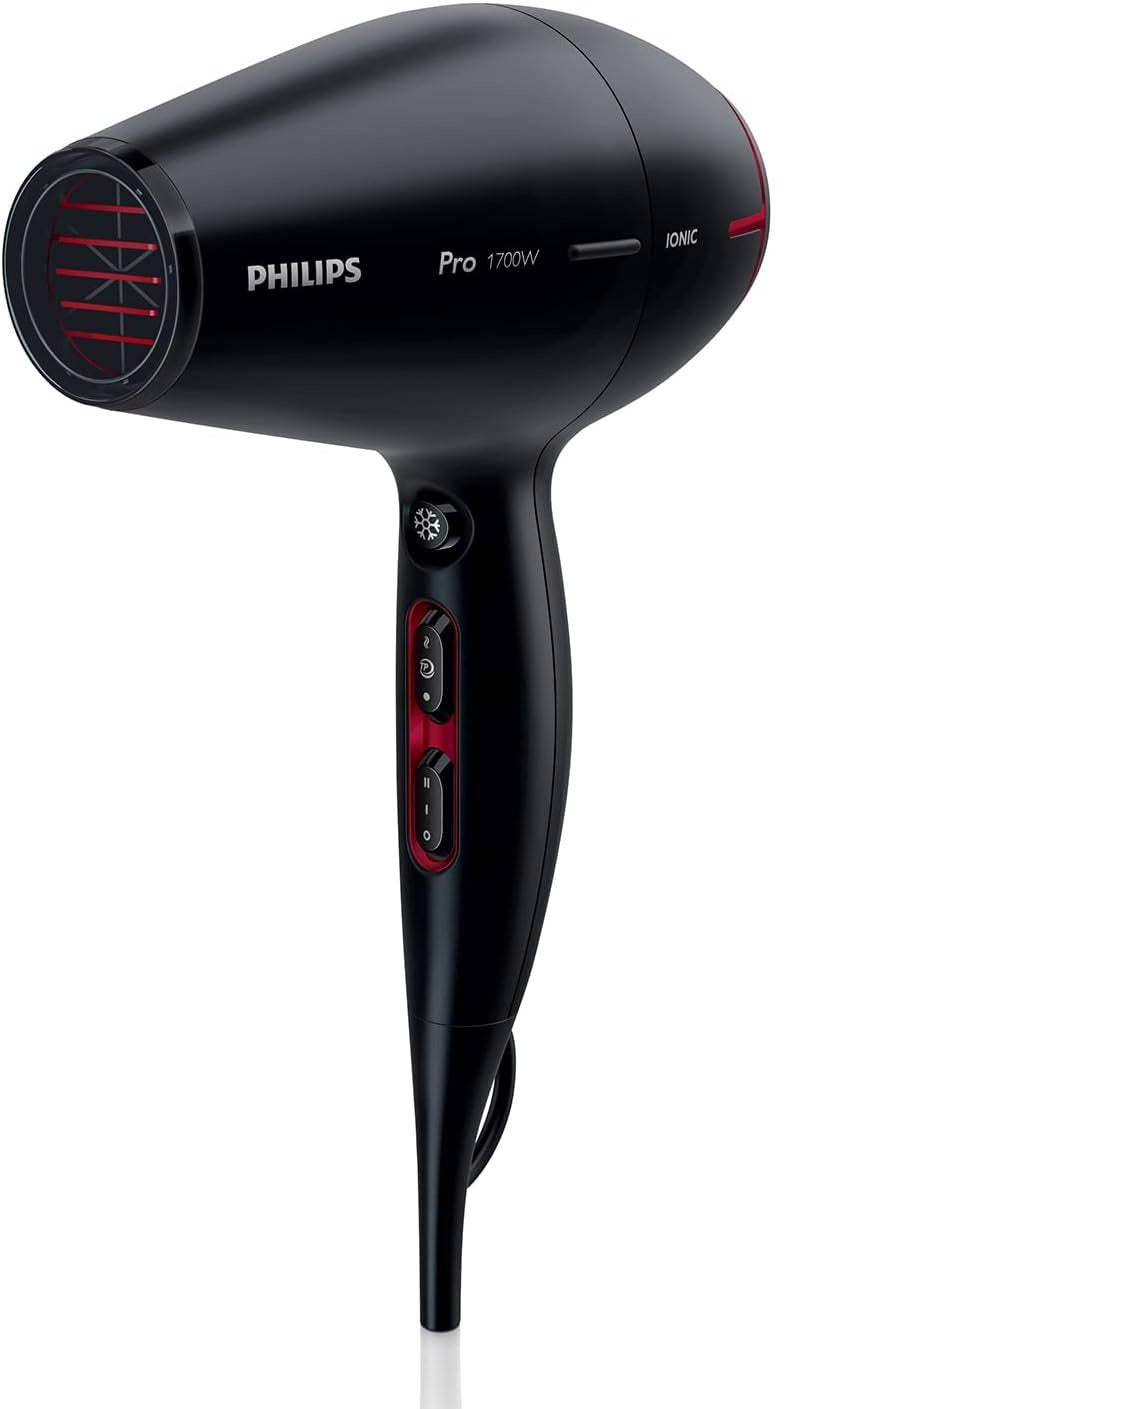 Philips Pro Hair Dryer in Bahrain - Best Personal Care Accessories